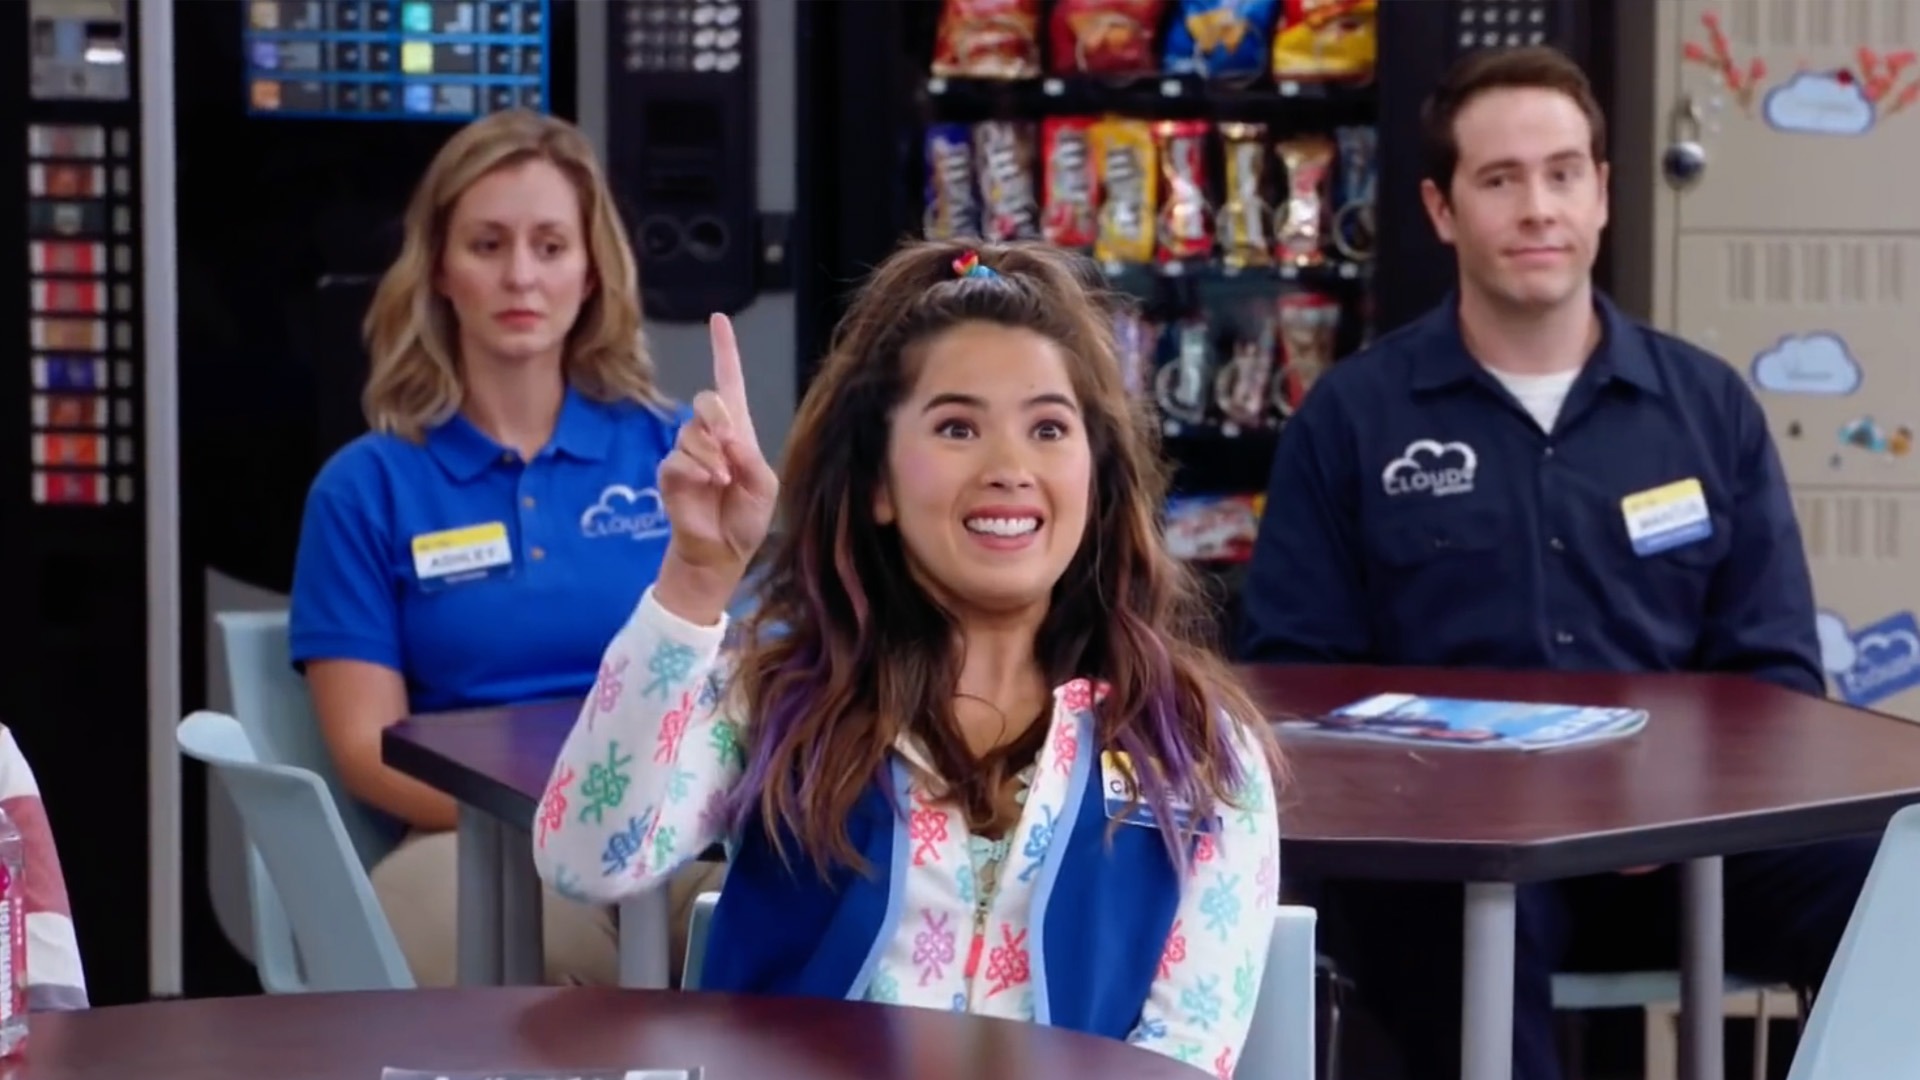 Superstore Season 6 Episode 5 Review: Hair Care Products - TV Fanatic